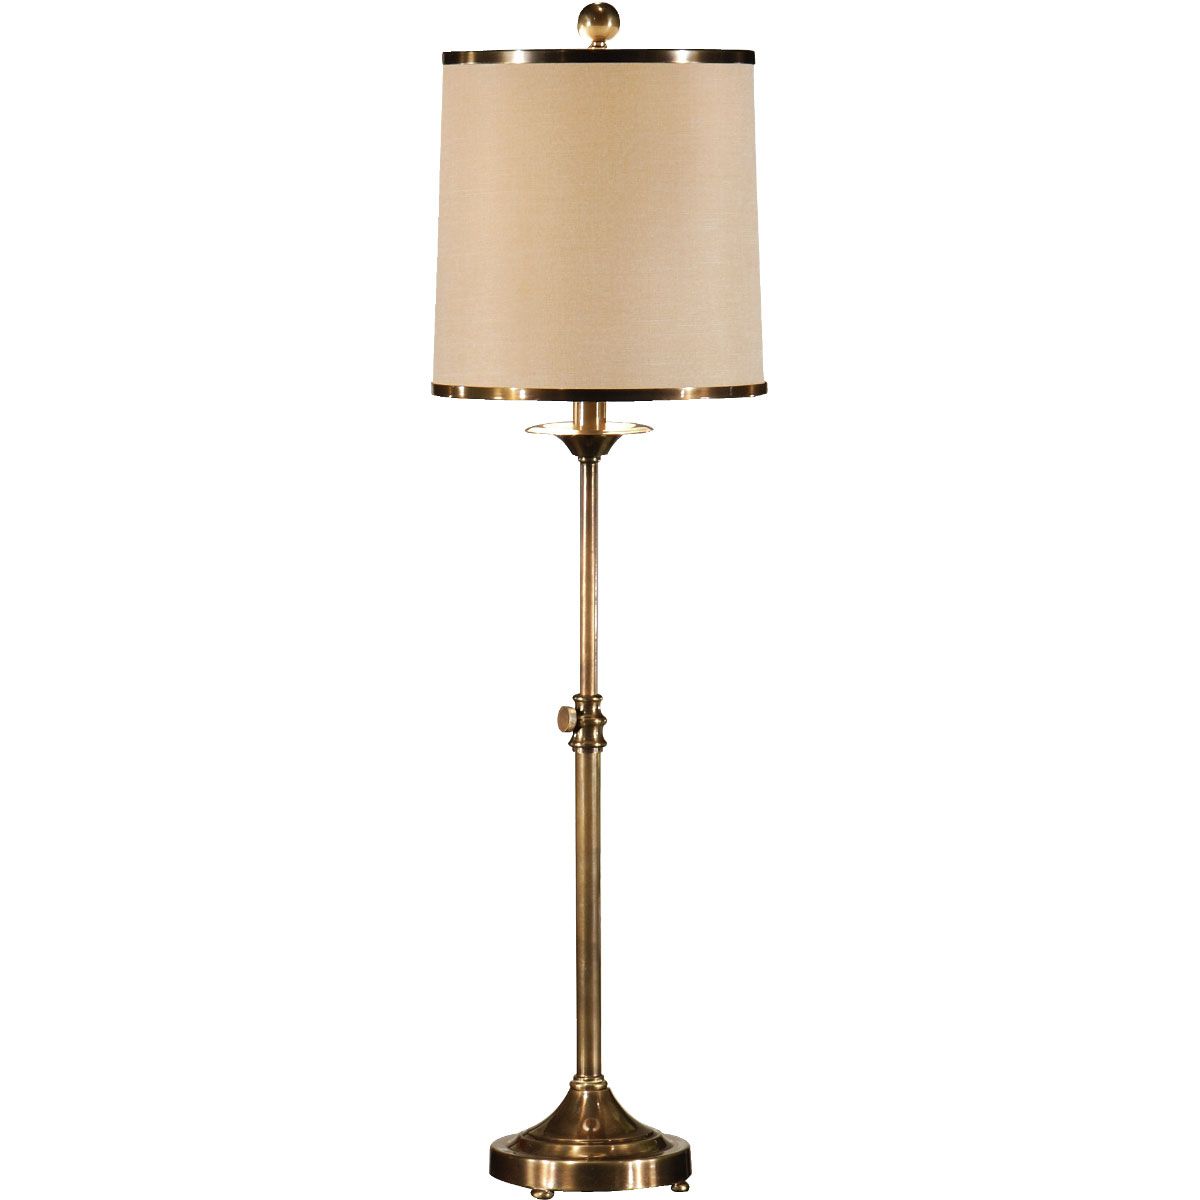 Adjustable Height Standing Lamps With Most Current Lamp With Adjustable Height – Brass Table Lamps (View 12 of 15)